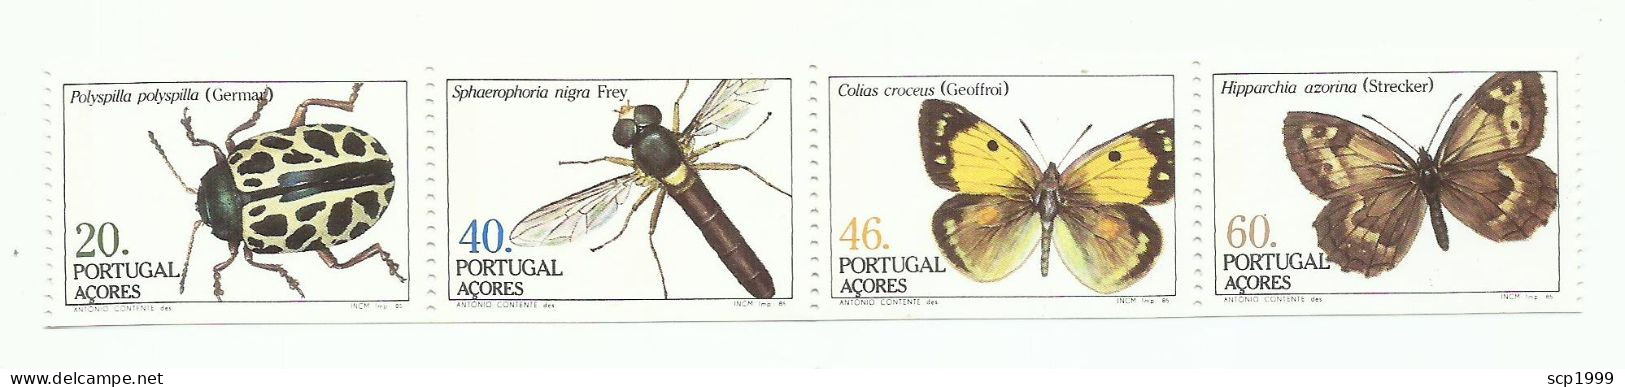 Portugal 1985 - Azores Insects Booklet MNH - Cuadernillos